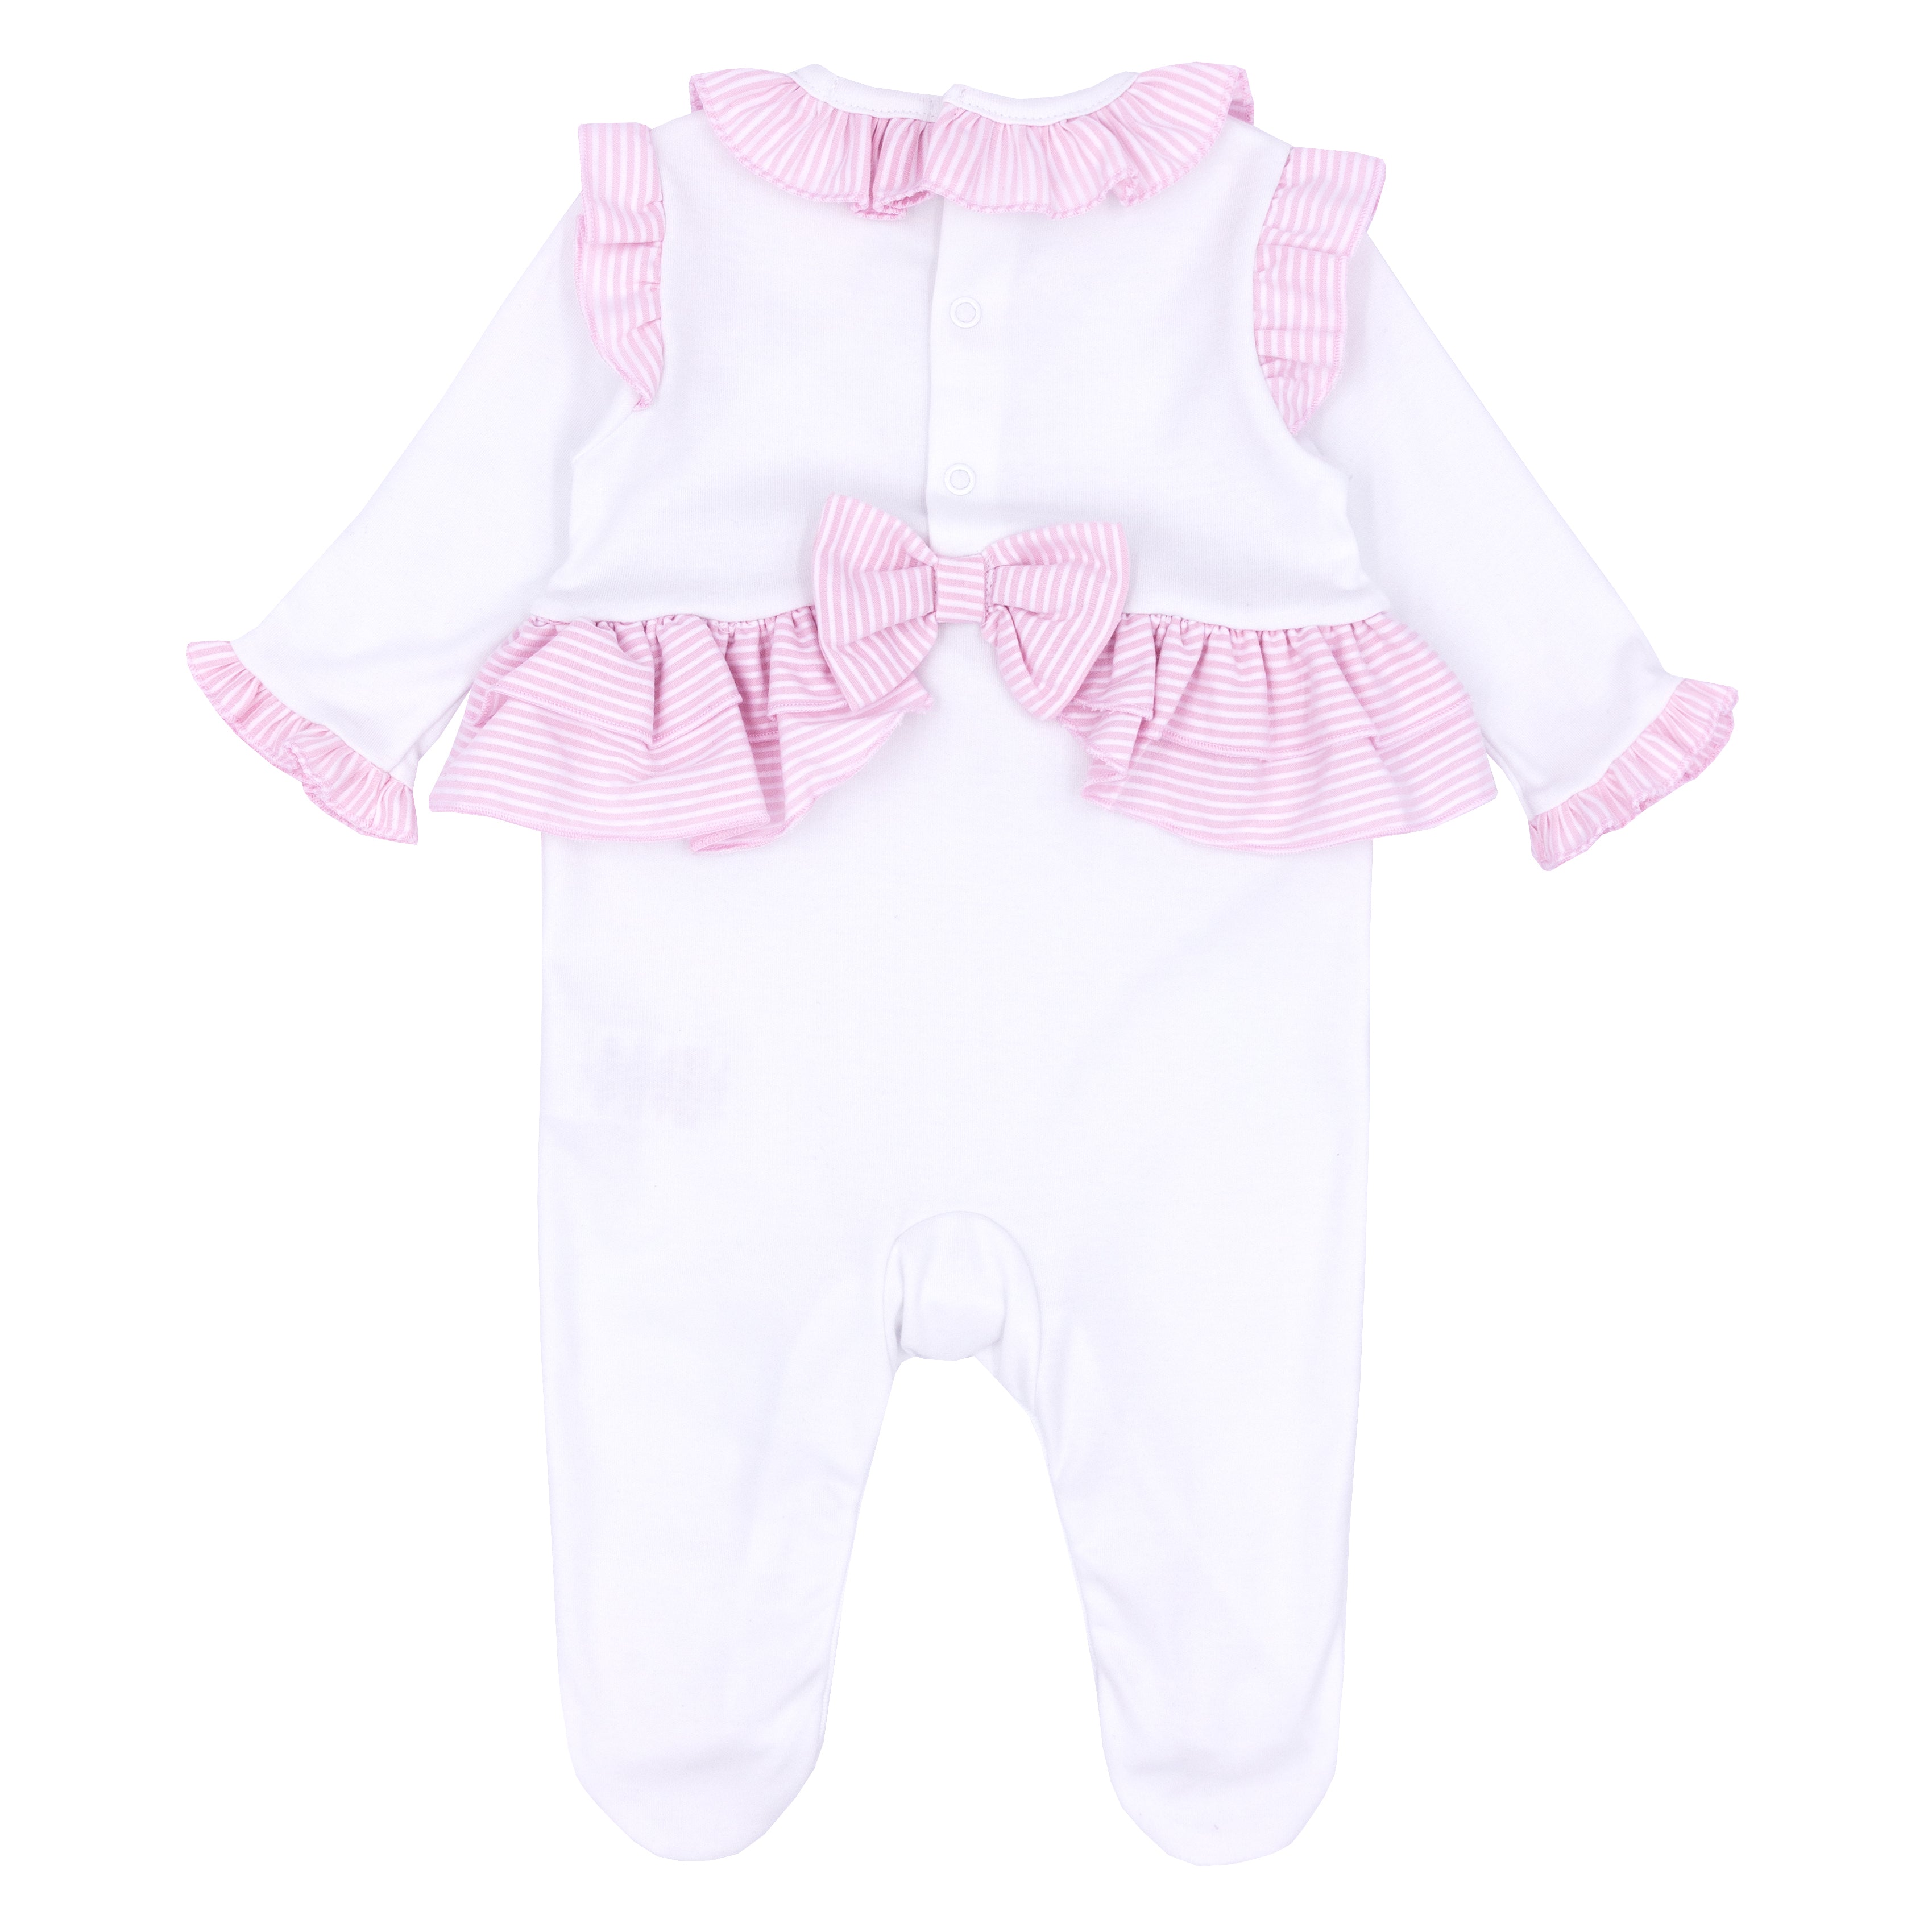 Girls sleeper with frill and diamante applique